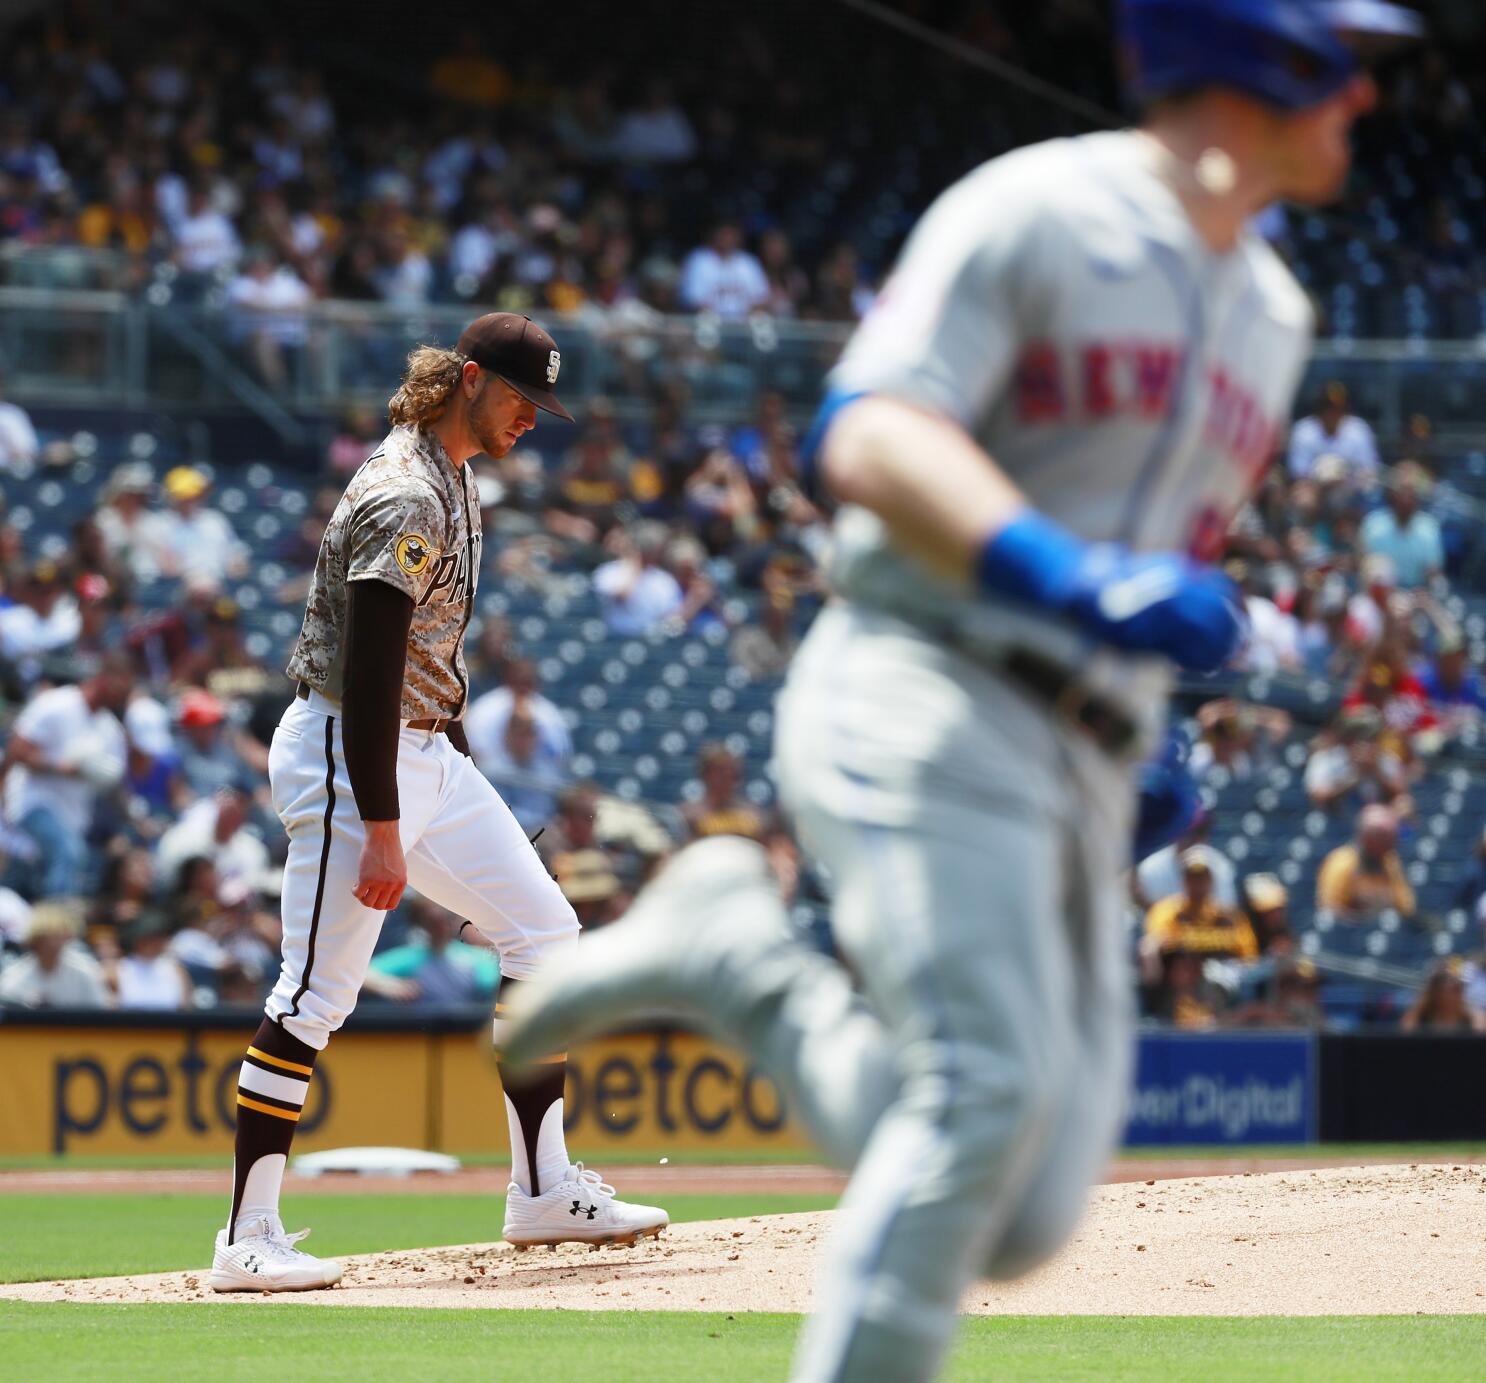 This Week in Mets: Where has the offense regressed the most since